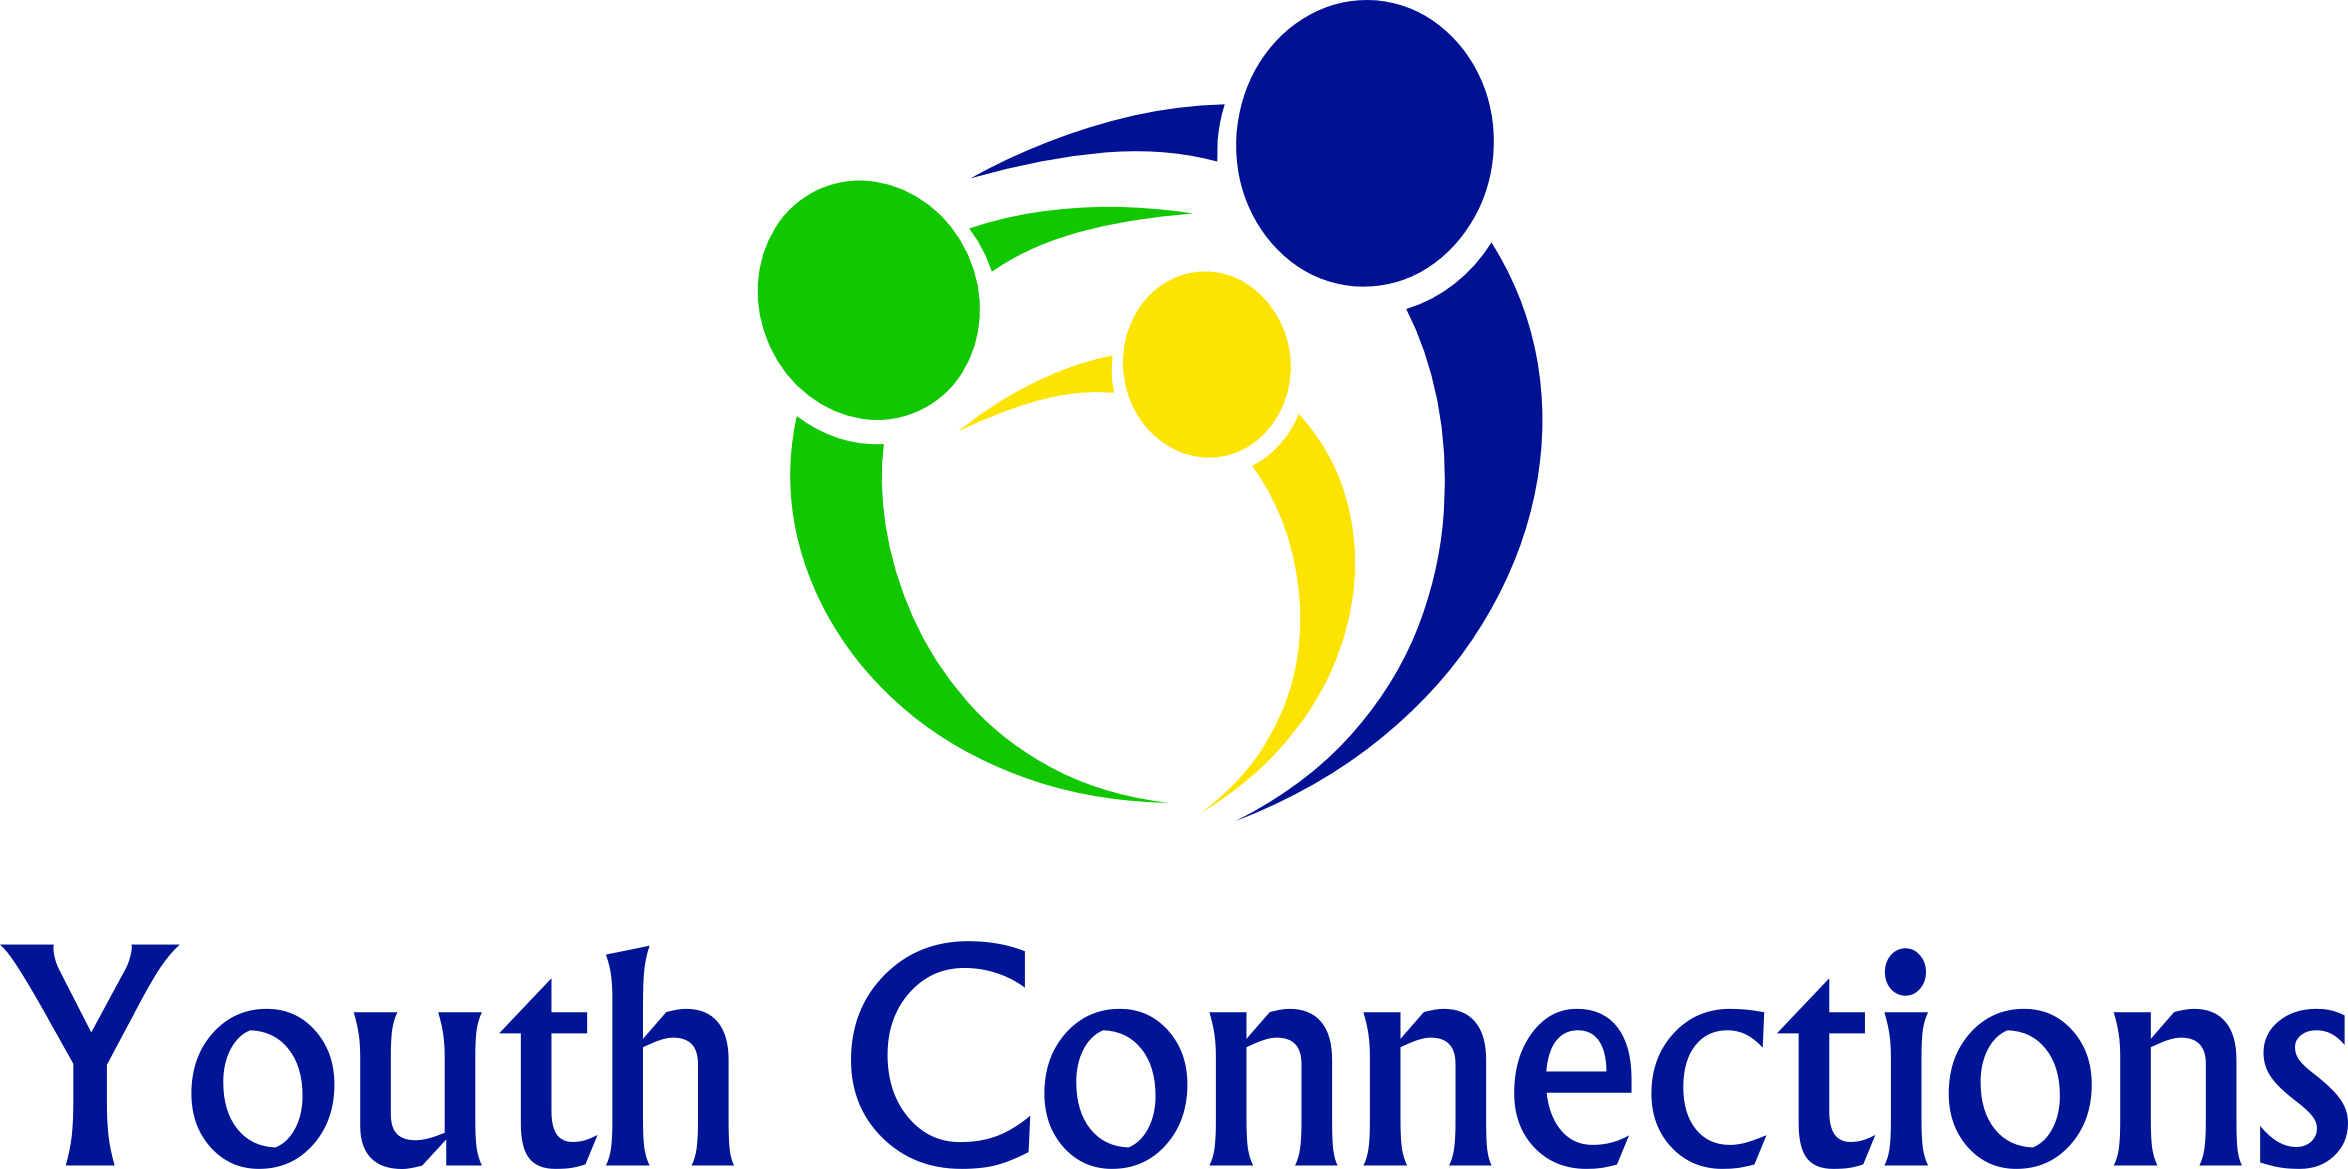 youthconnections.org logo